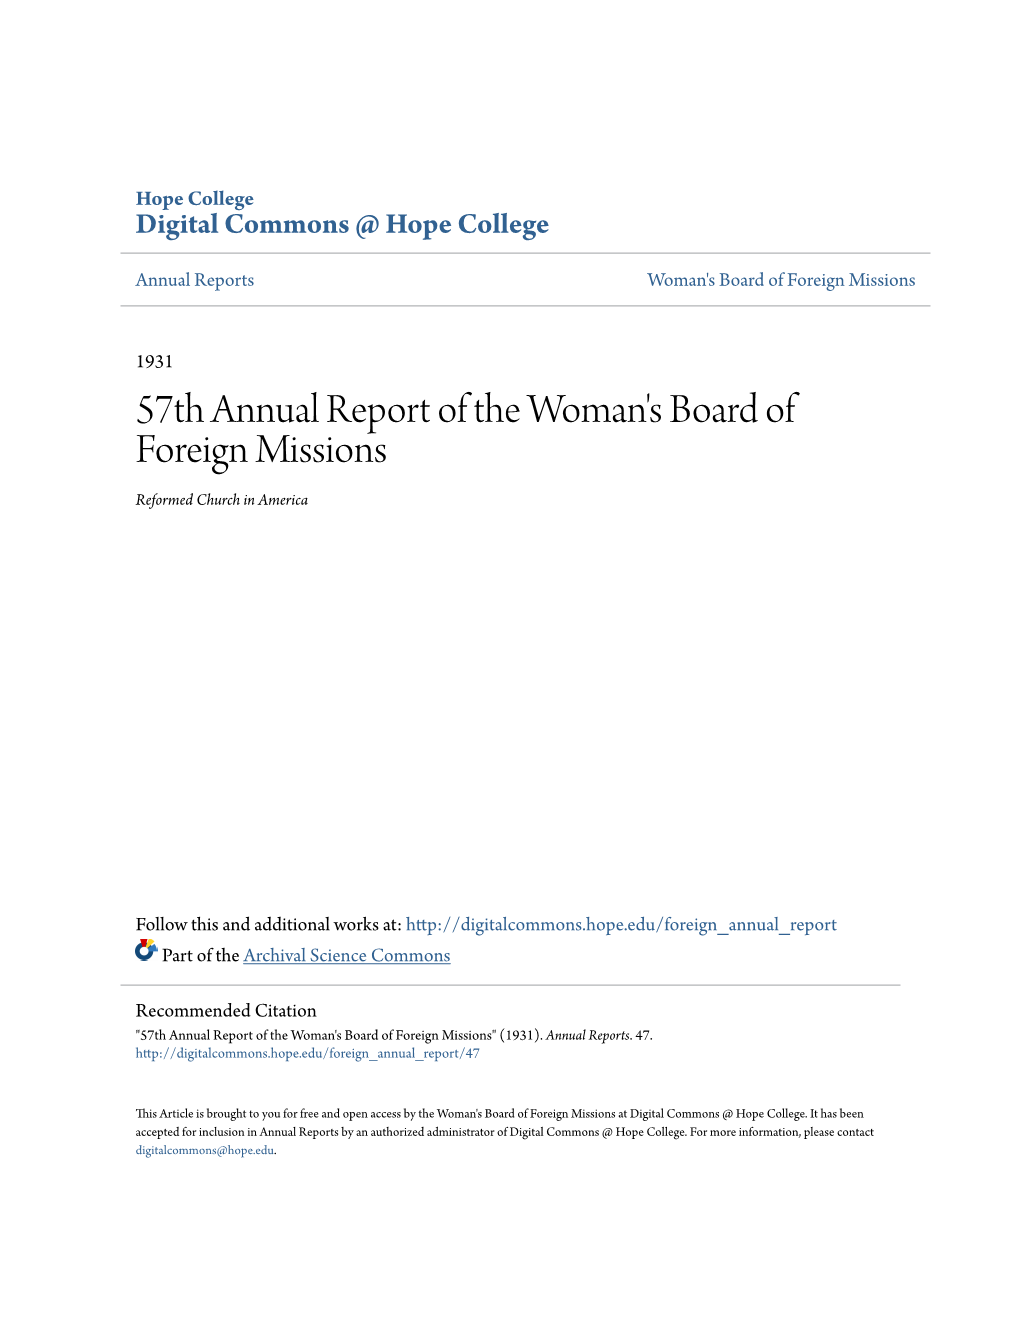 57Th Annual Report of the Woman's Board of Foreign Missions